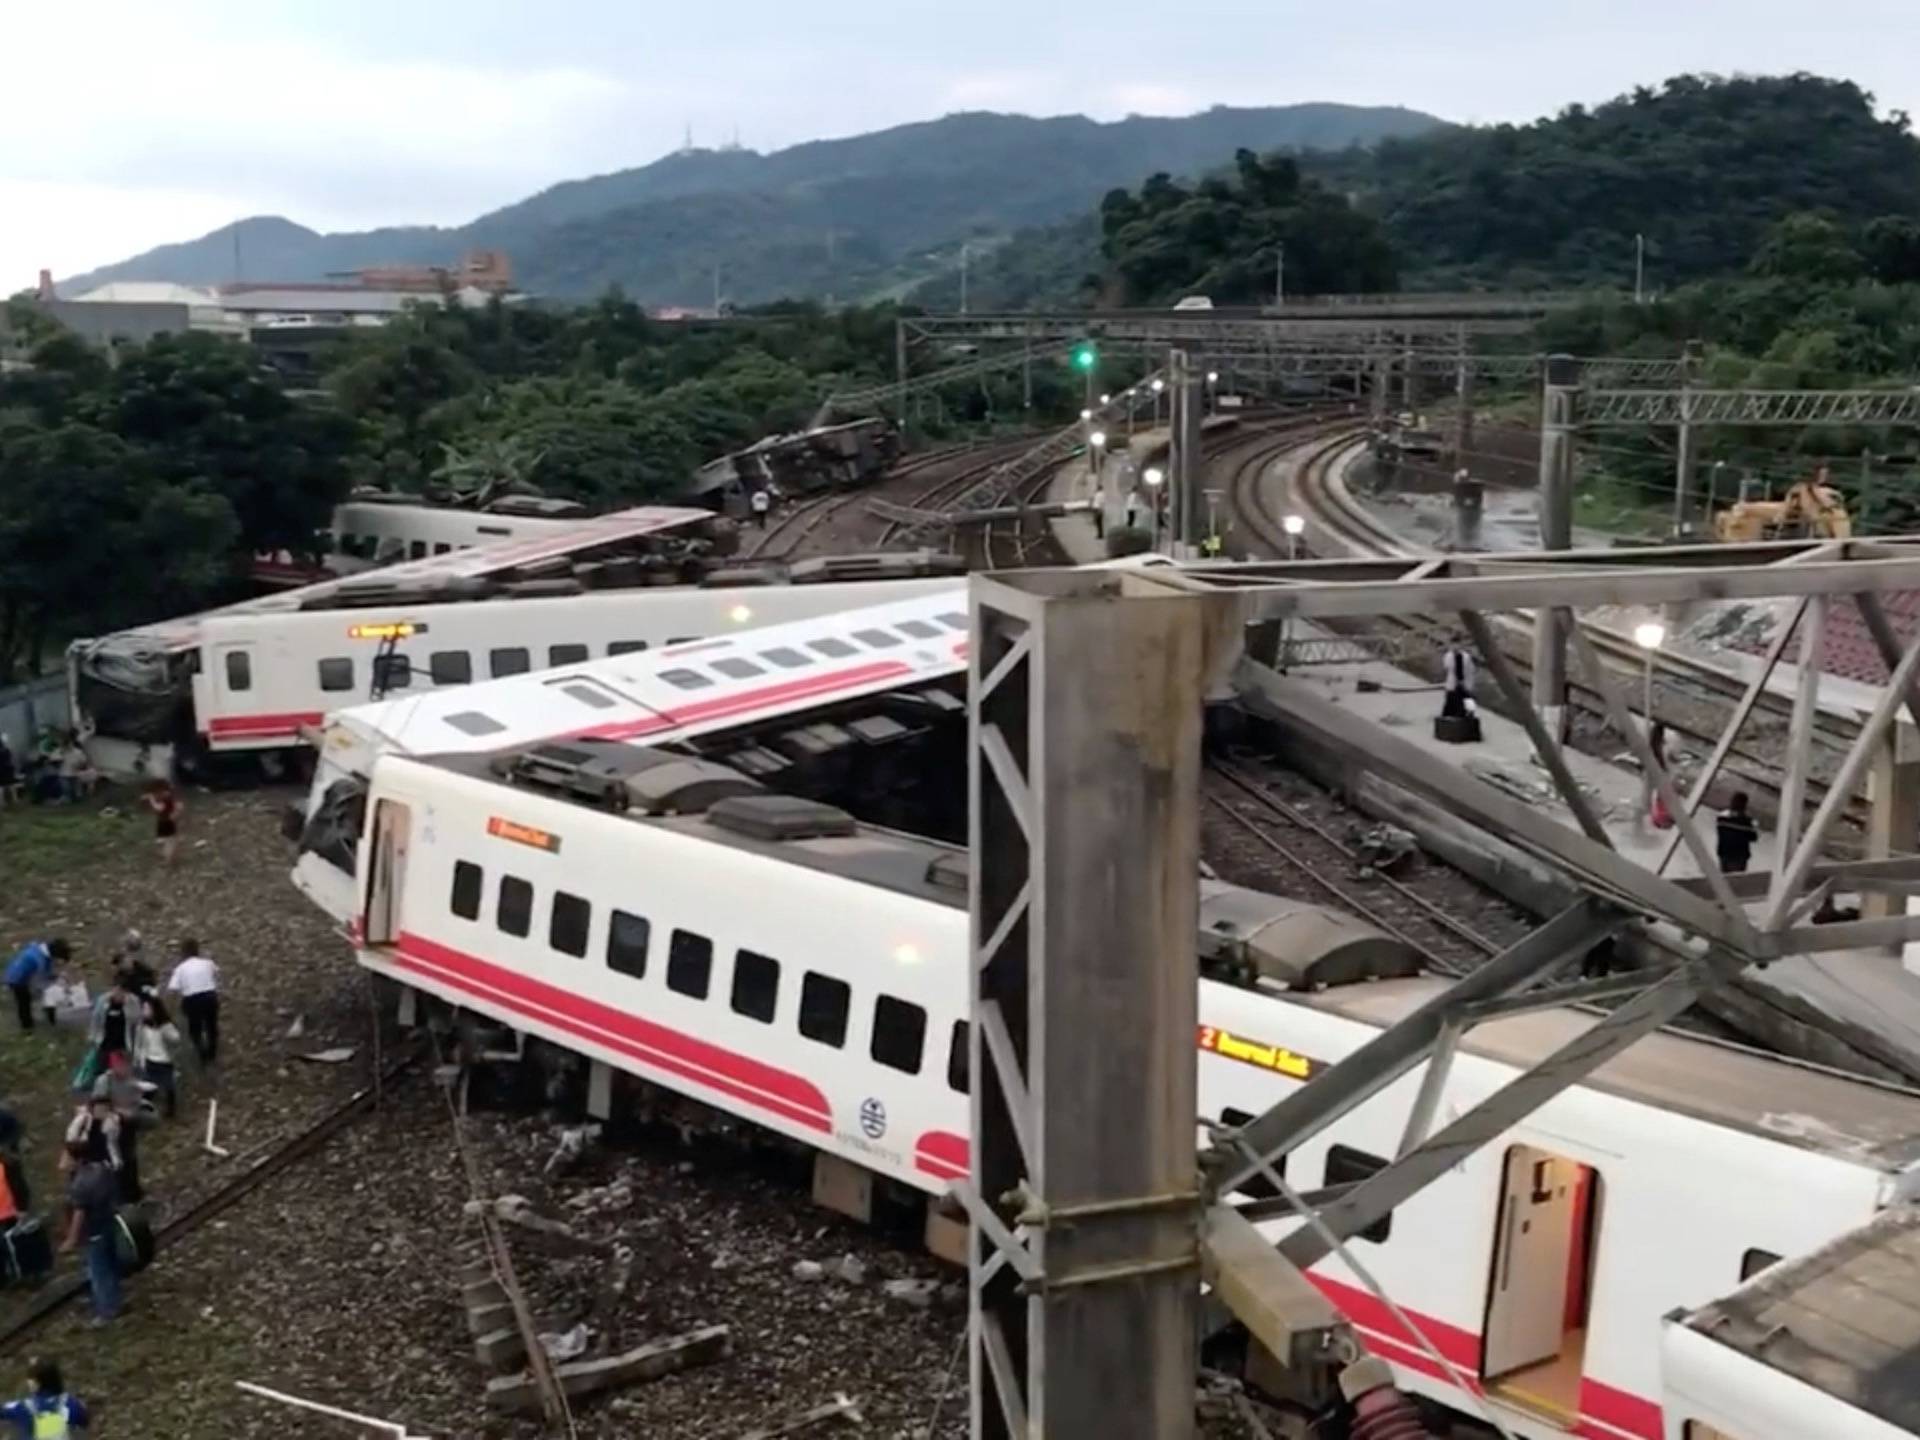 The wreckage of a train which had overturned is pictured during a rescue operation in Yilan County, Taiwan